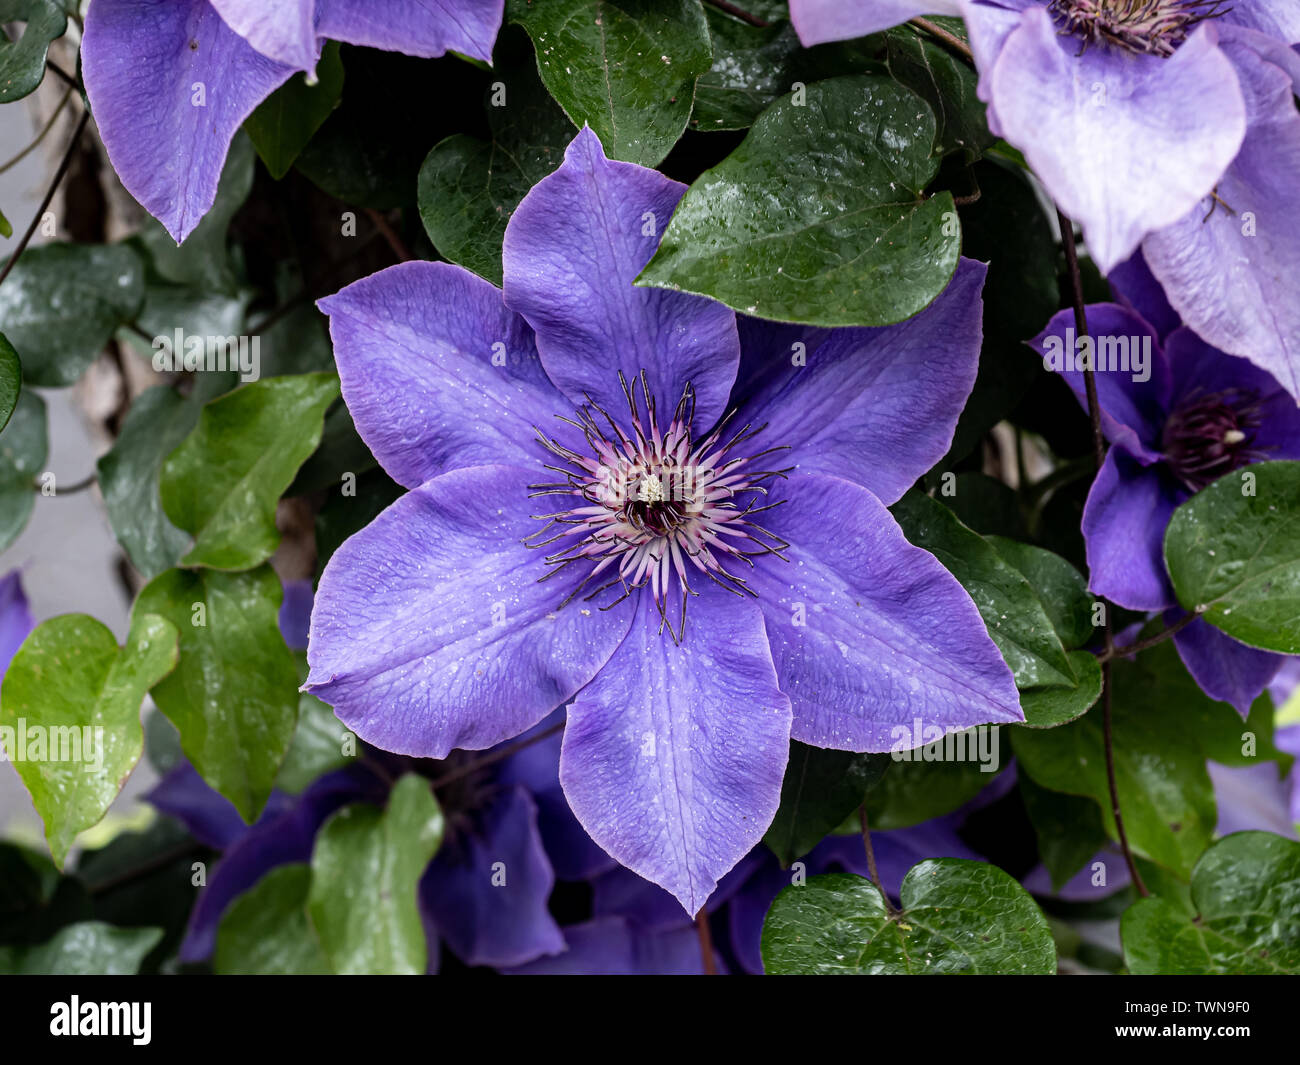 A purple purple clematis flower, clematis viticella, blooms in a Japanese garden. Stock Photo